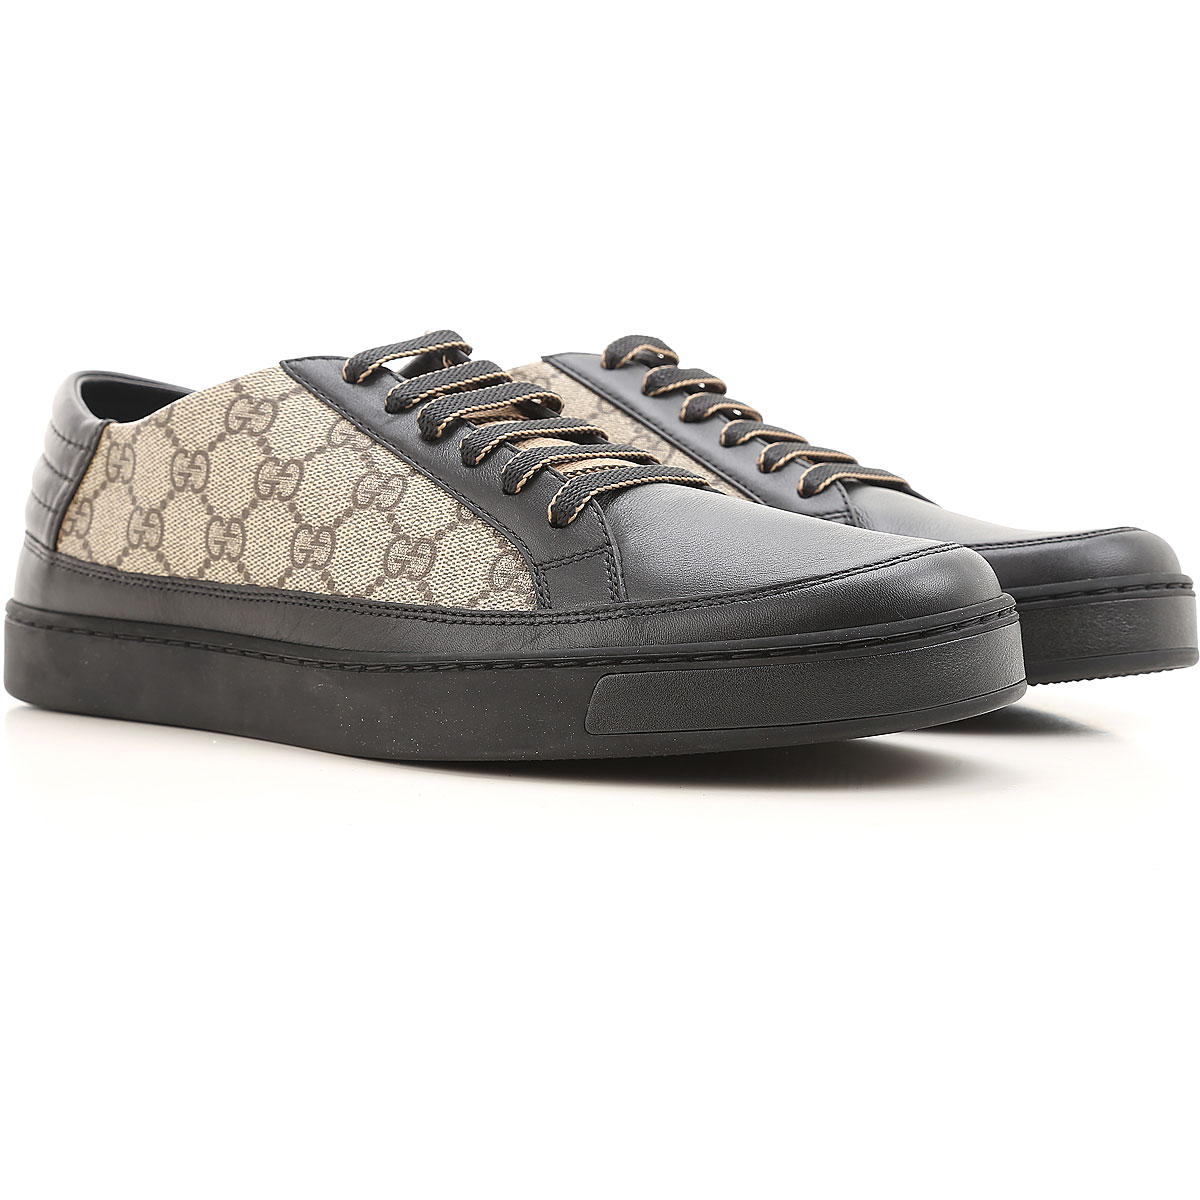 Mens Shoes Gucci, Style code: 386752-a9ln0-1162